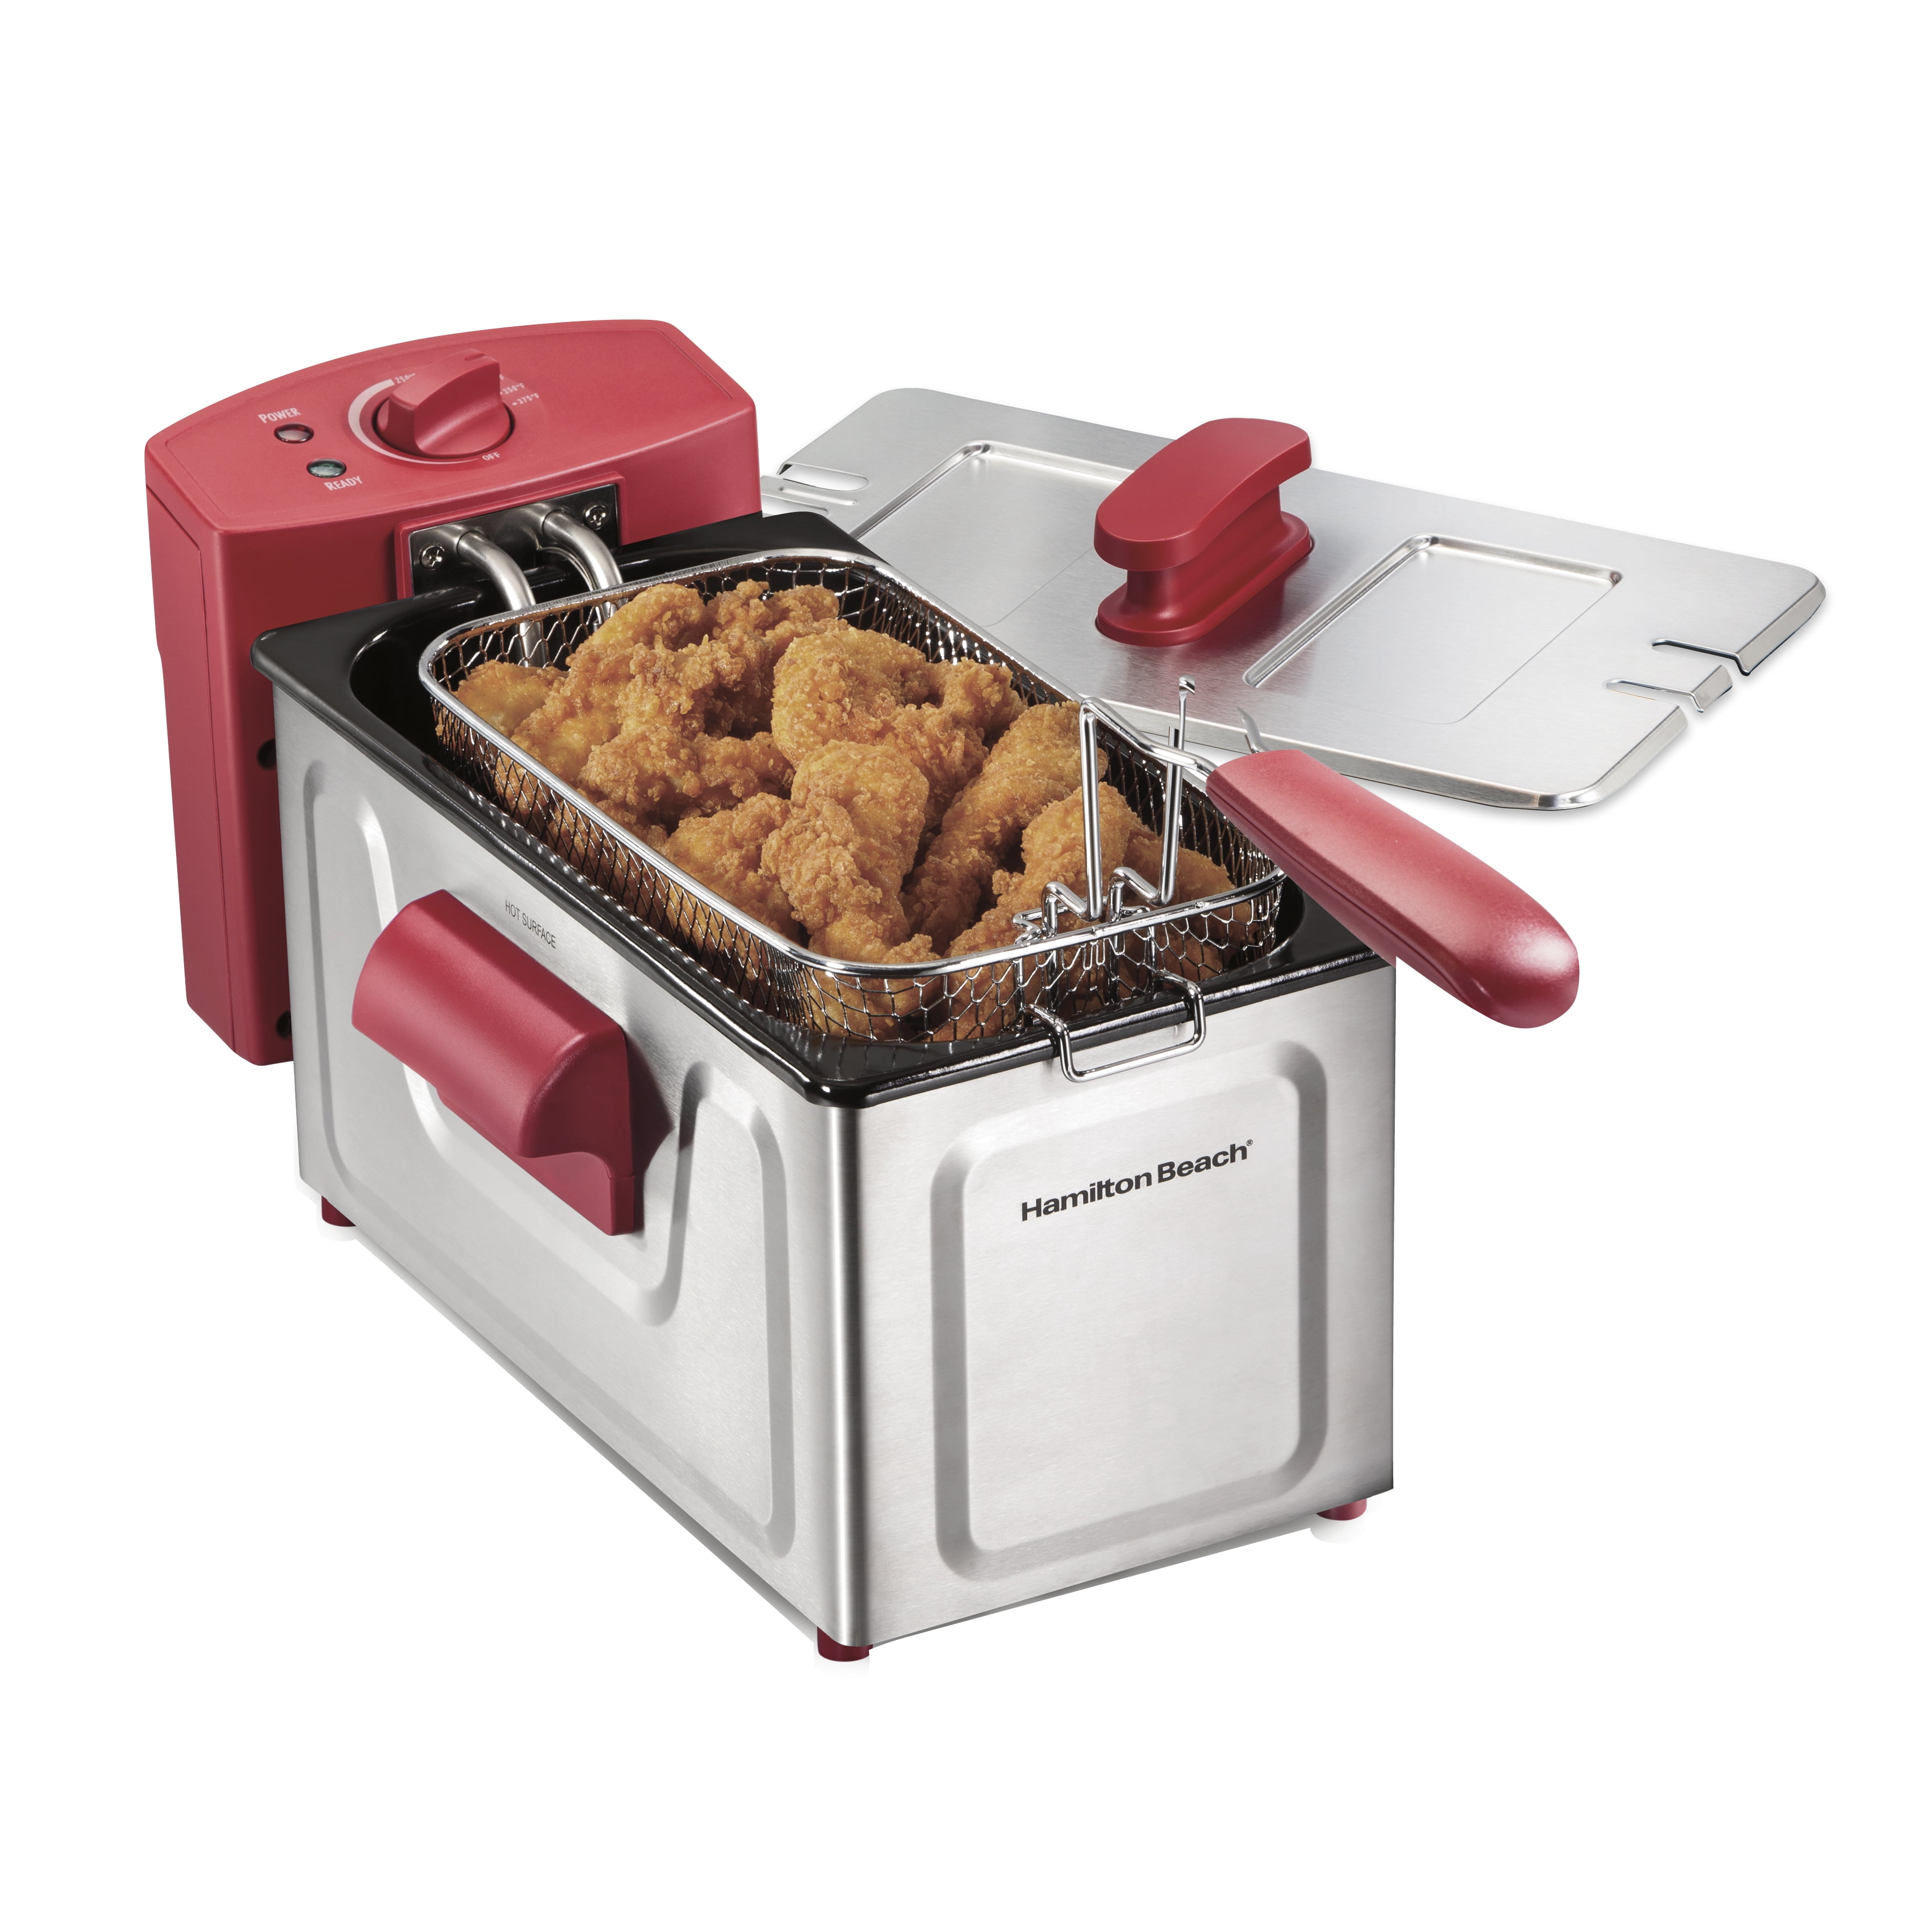 Hamilton Beach 8 Cup Deep Fryer, Family-size Food Capacity cooks up to 6  cups of Food, Black, 35335 